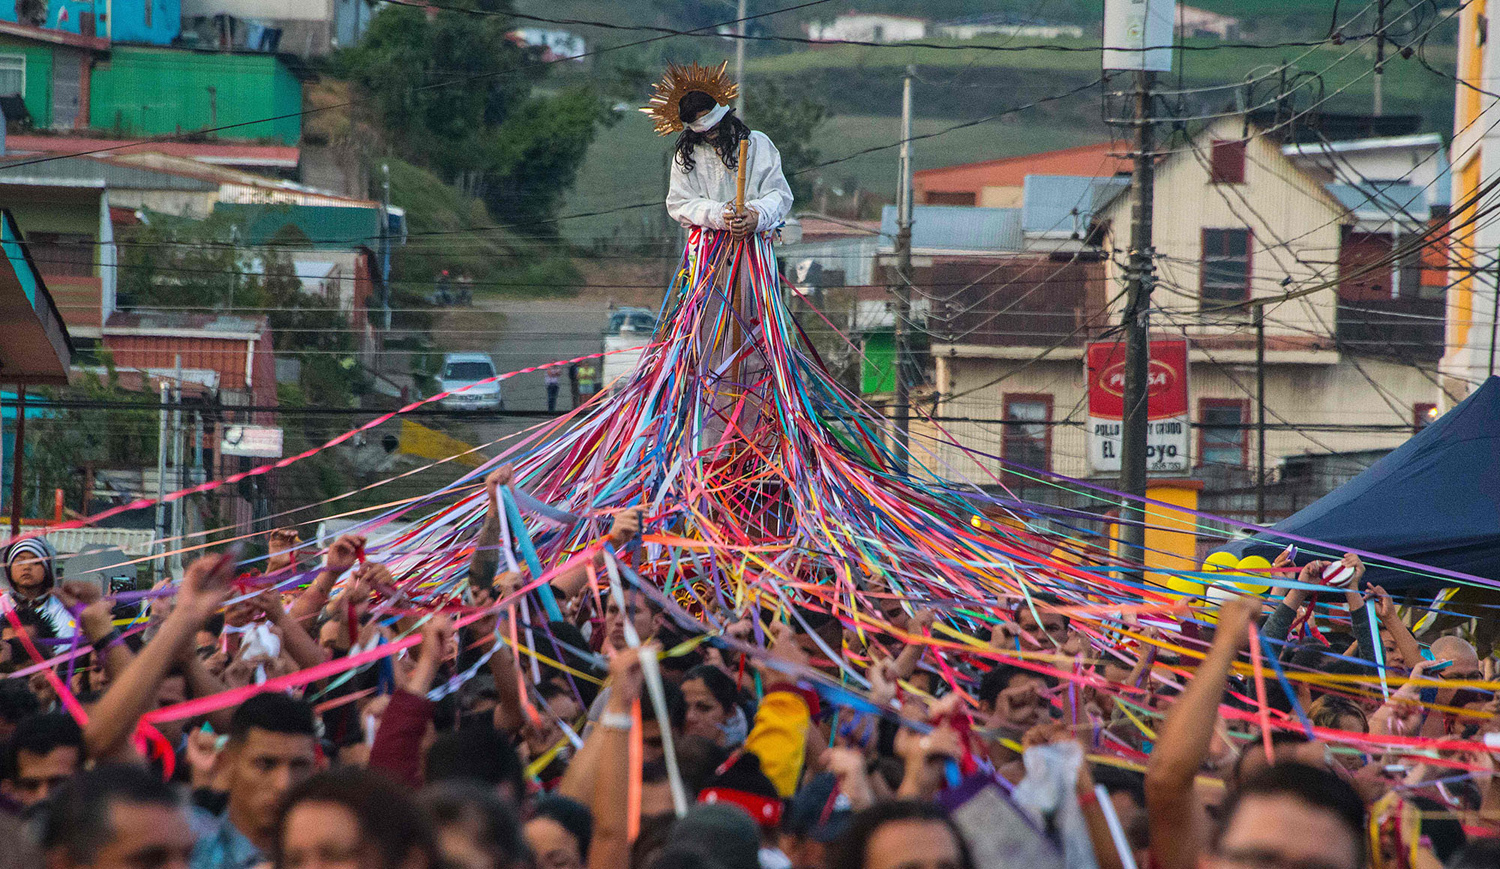 Catholics carry a statue of Jesus Nazareno in a procession known as Jesus Nazareno of the tapes during Holy Week in Cot, Costa Rica, 25 kilometres east of San Jose. According to Jorge Masis, a priest at the church, people tie ribbons to the statue to symbolize promises they make to Jesus during Holy Week. PHOTO: AFP